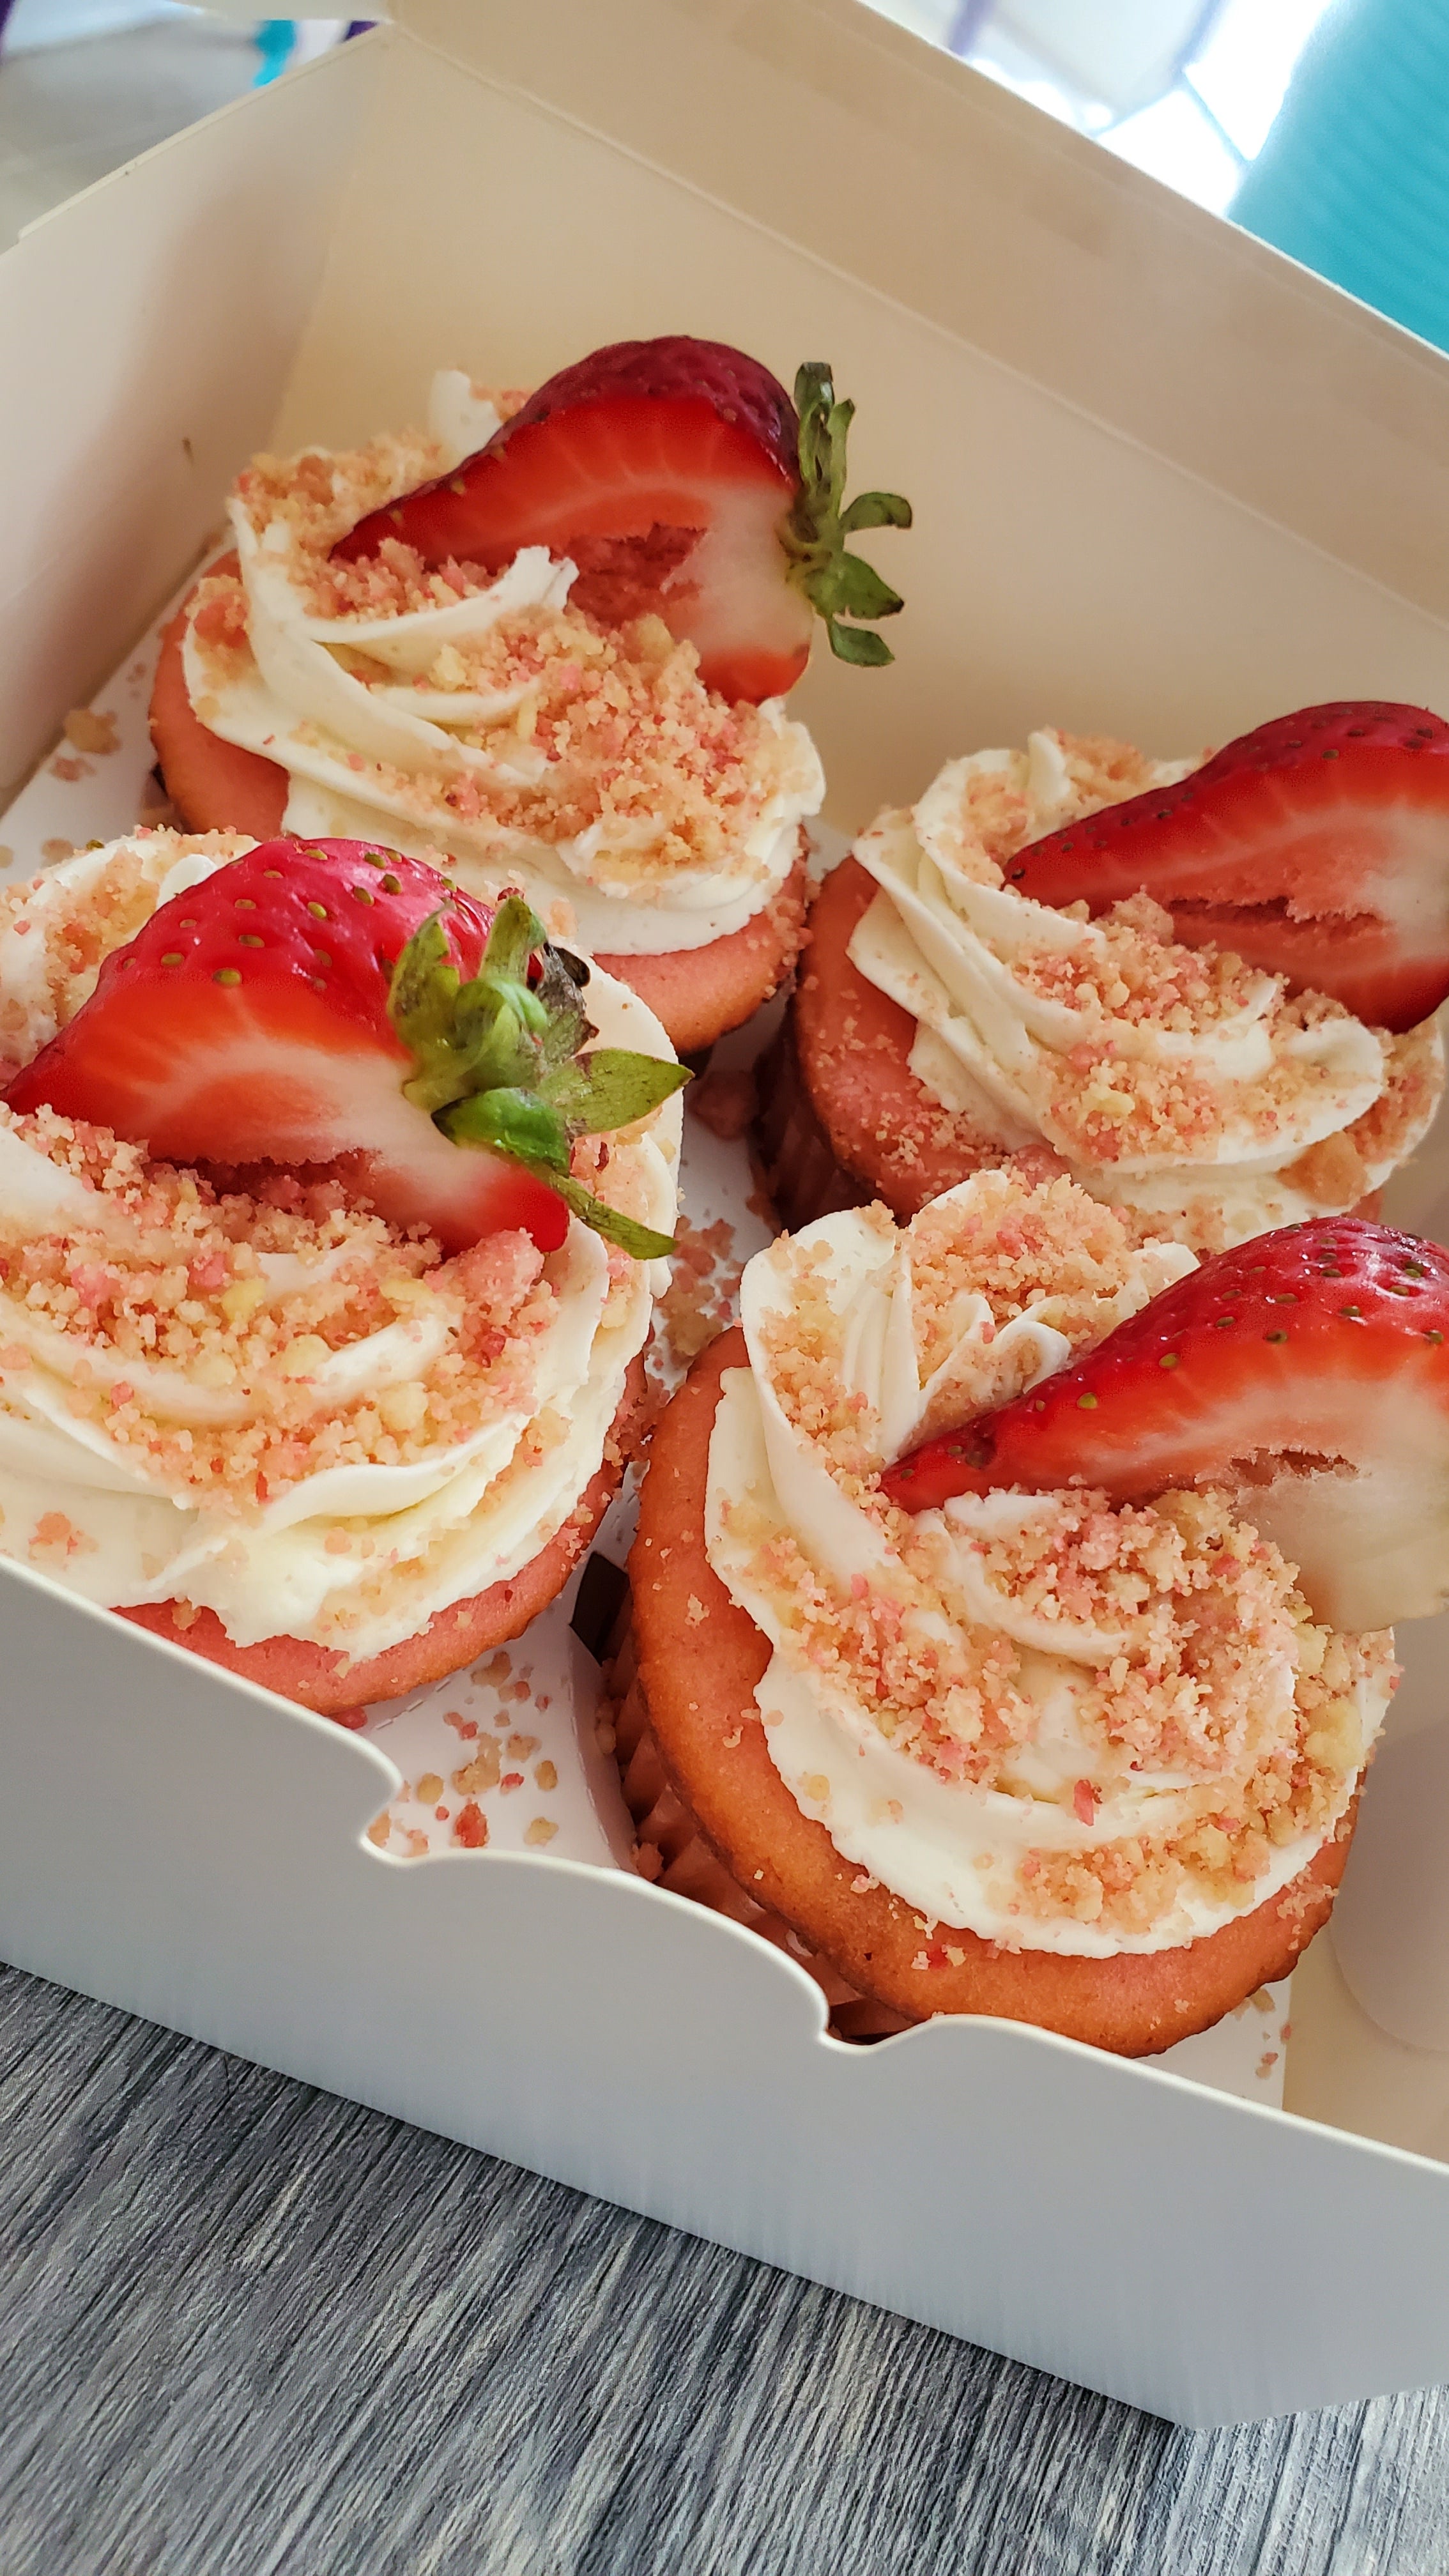 Strawberry Crunch Cupcakes 12ct